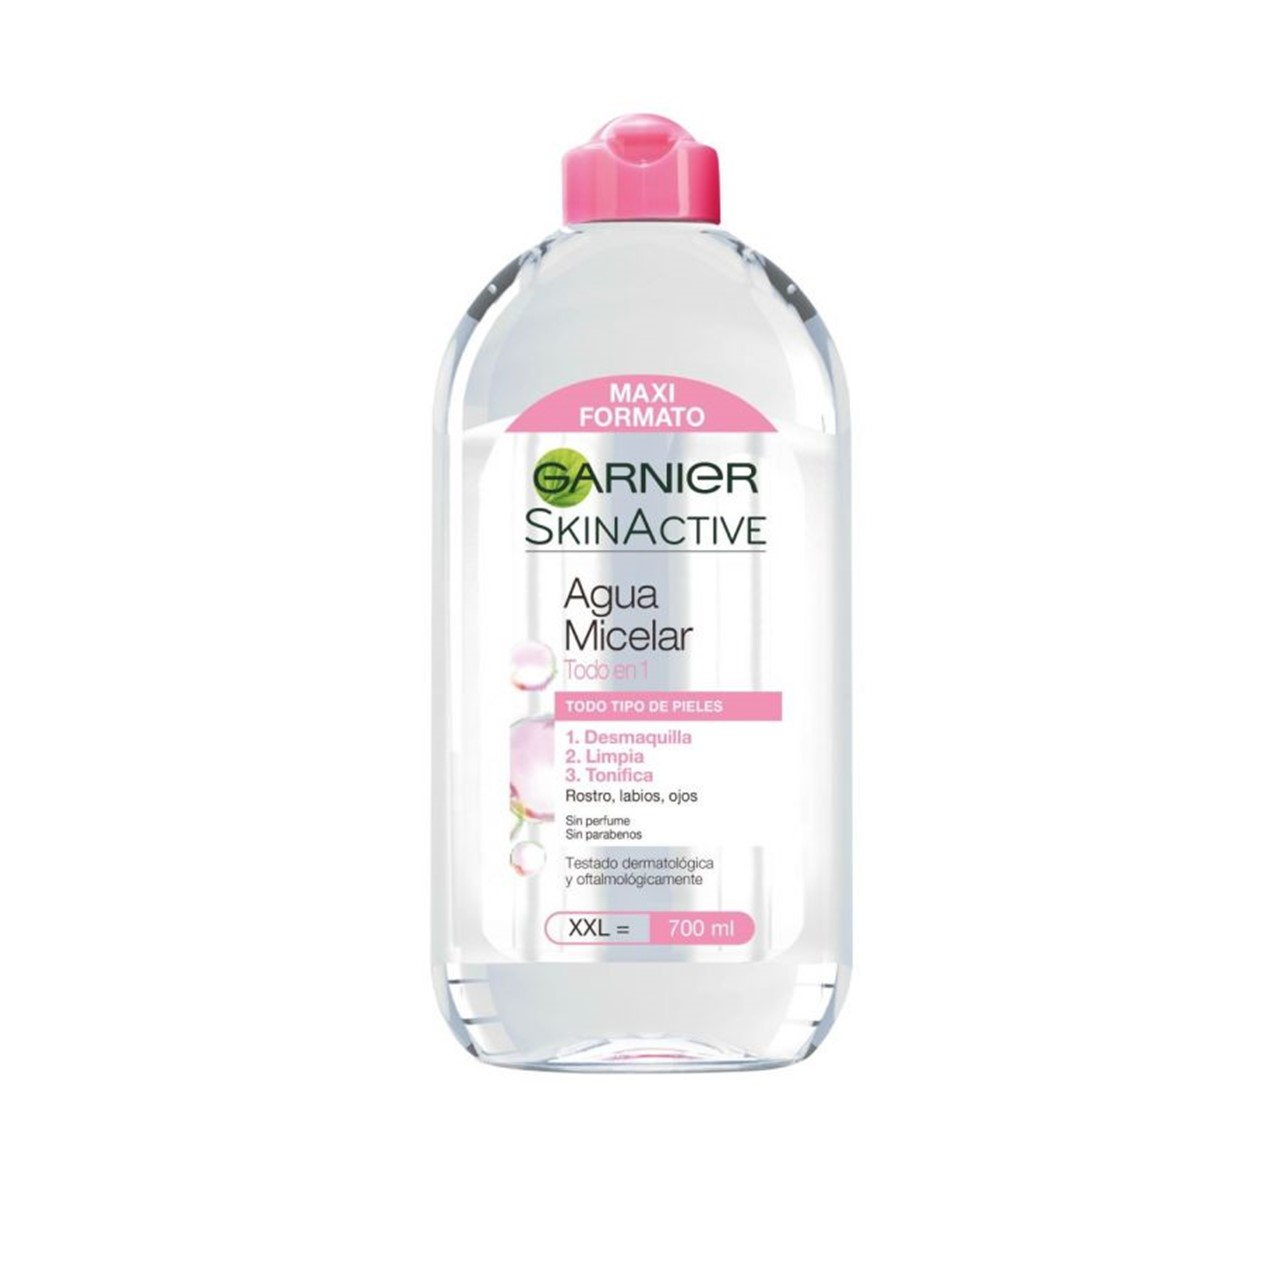 Anti-Pollution Micellar Cleansing Water 150ml Reviews 2023